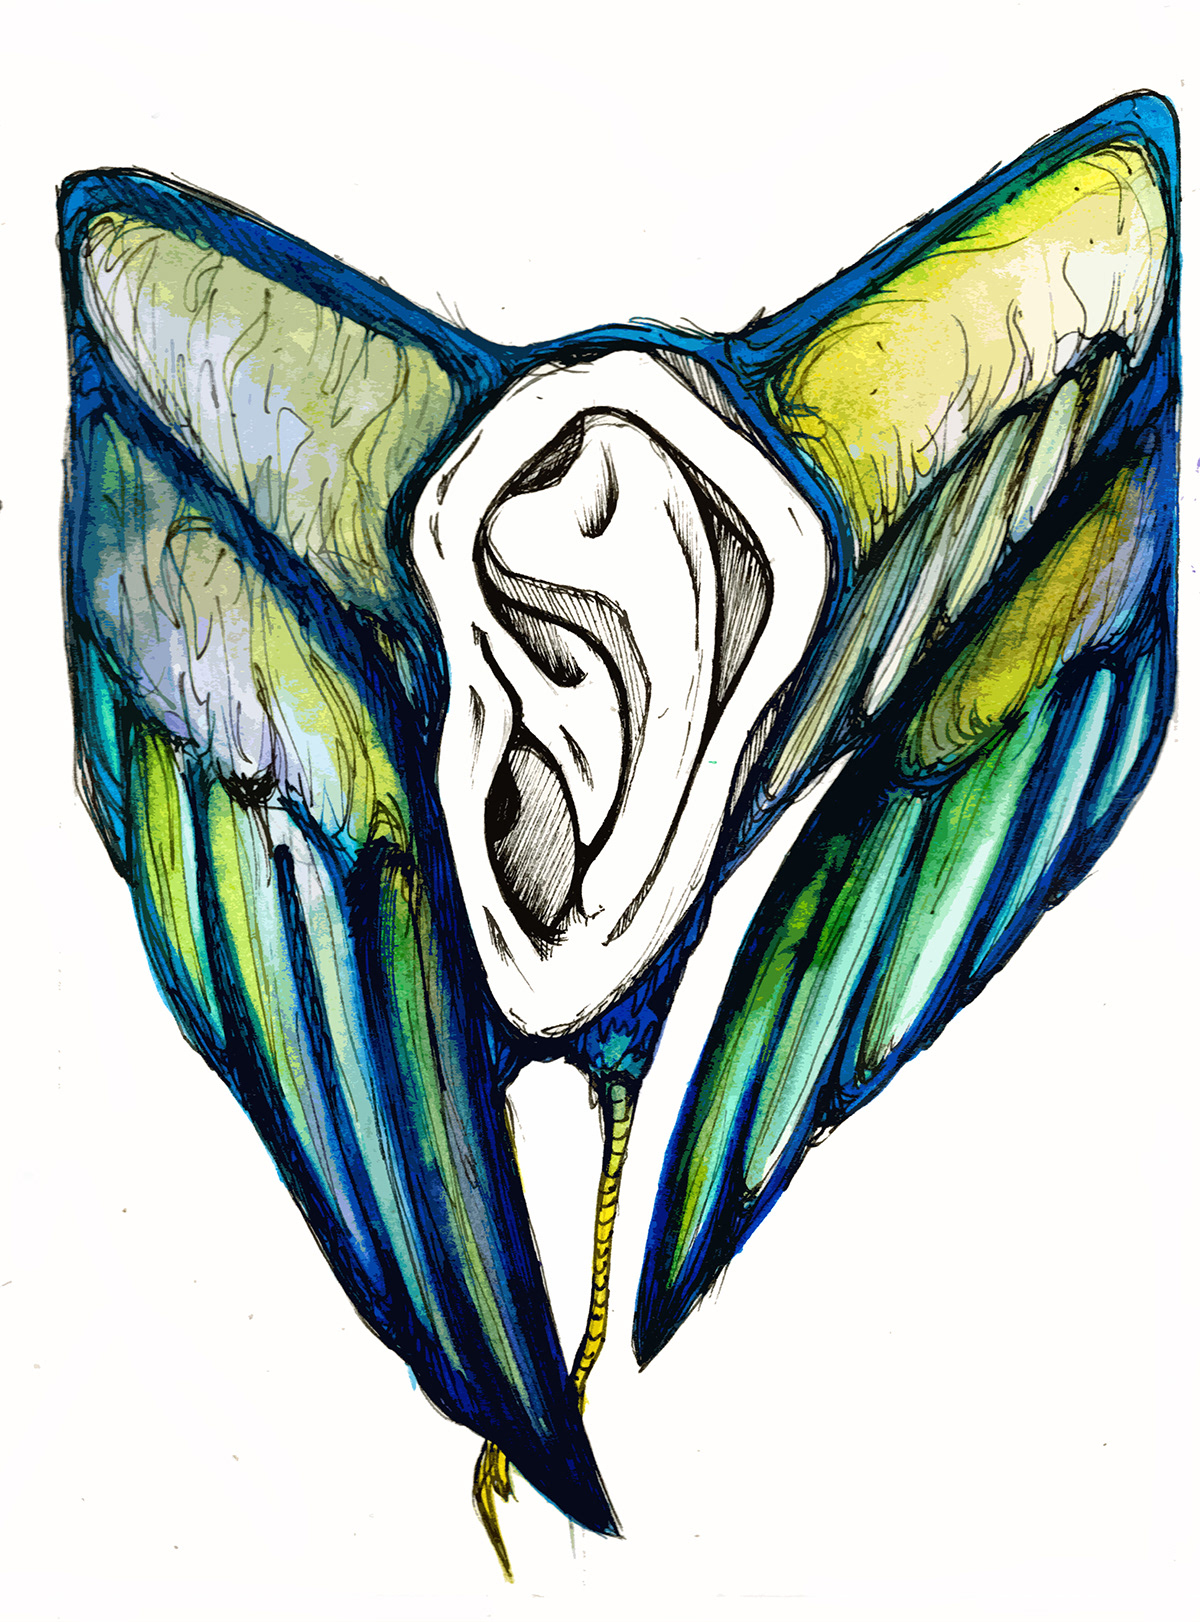 noise noises ear ears abstract psychedelic wings doodle emotion sound Adobe Photoshop watercolor watercolour